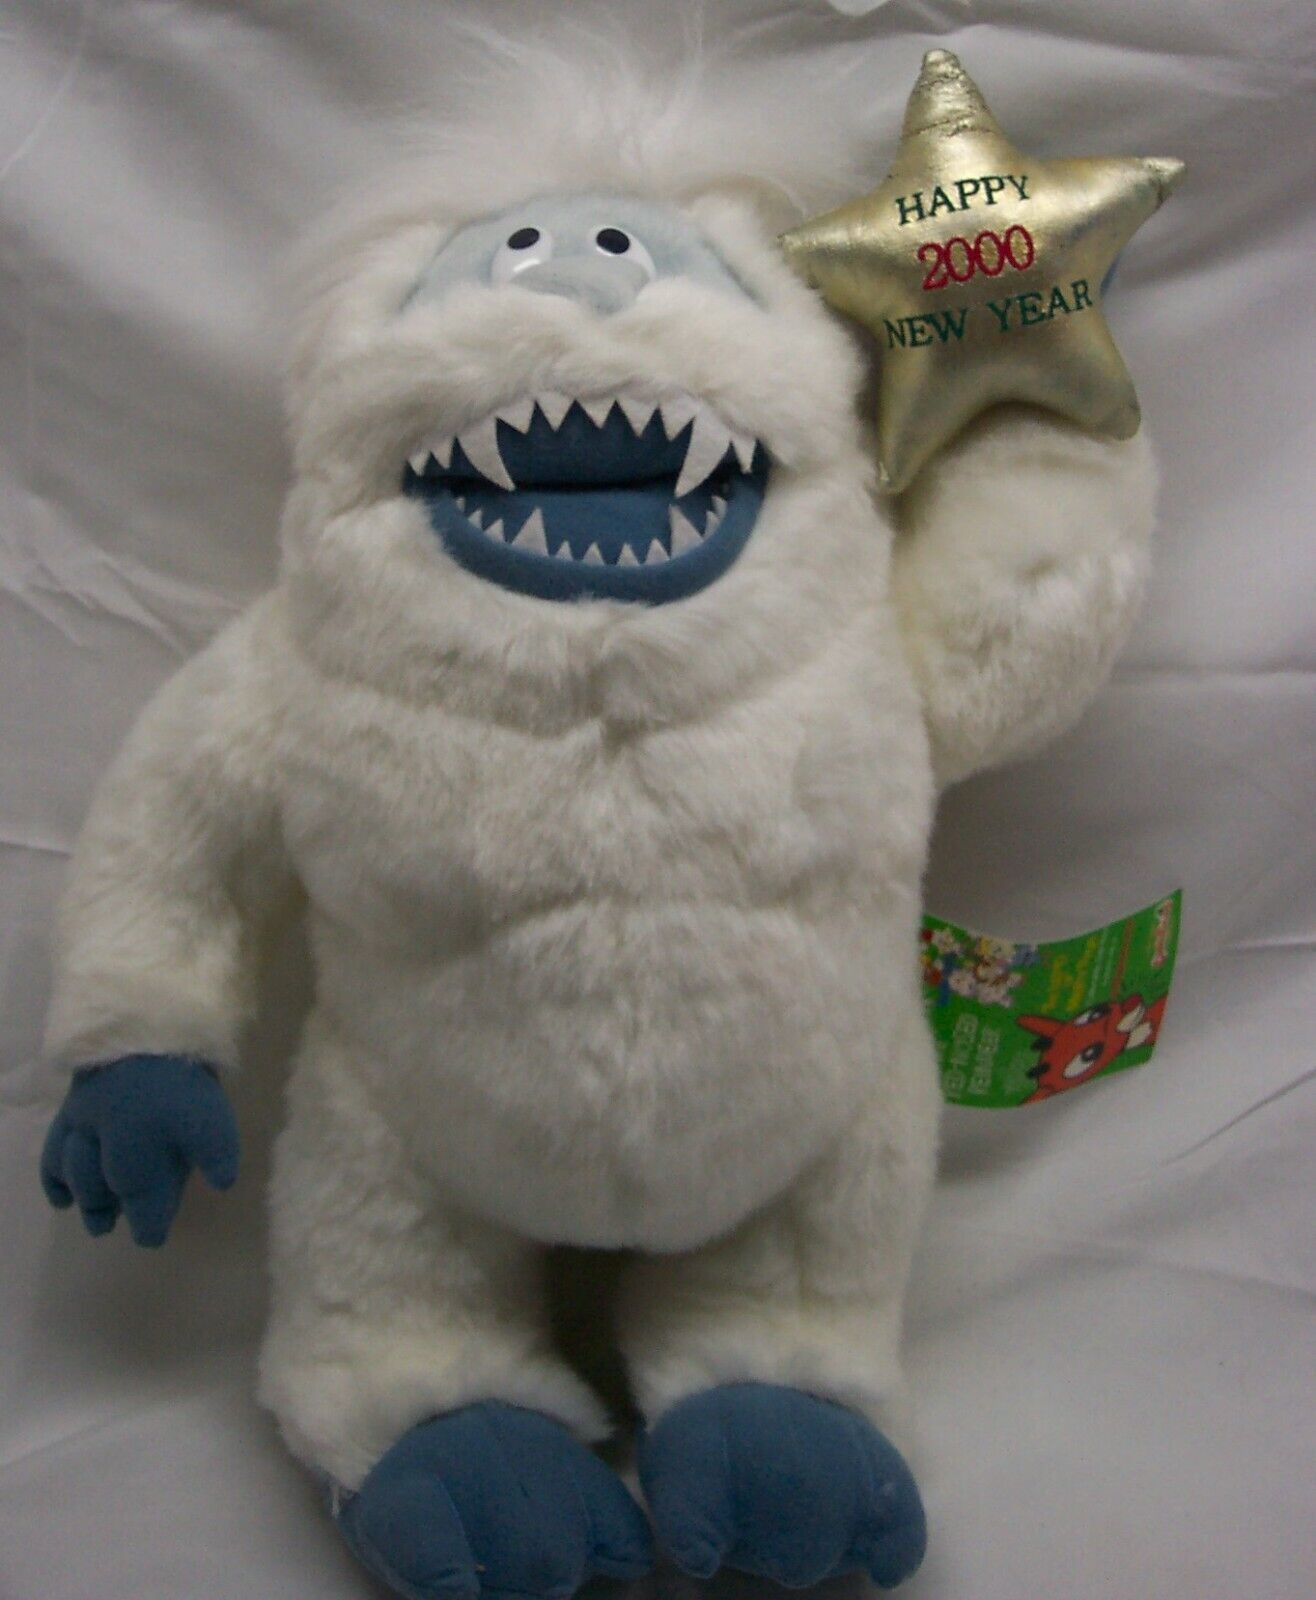 RUDOLPH THE RED NOSED REINDEER Misfit Toys BUMBLE SNOWMAN 11" STUFFED ANIMAL - $99.00